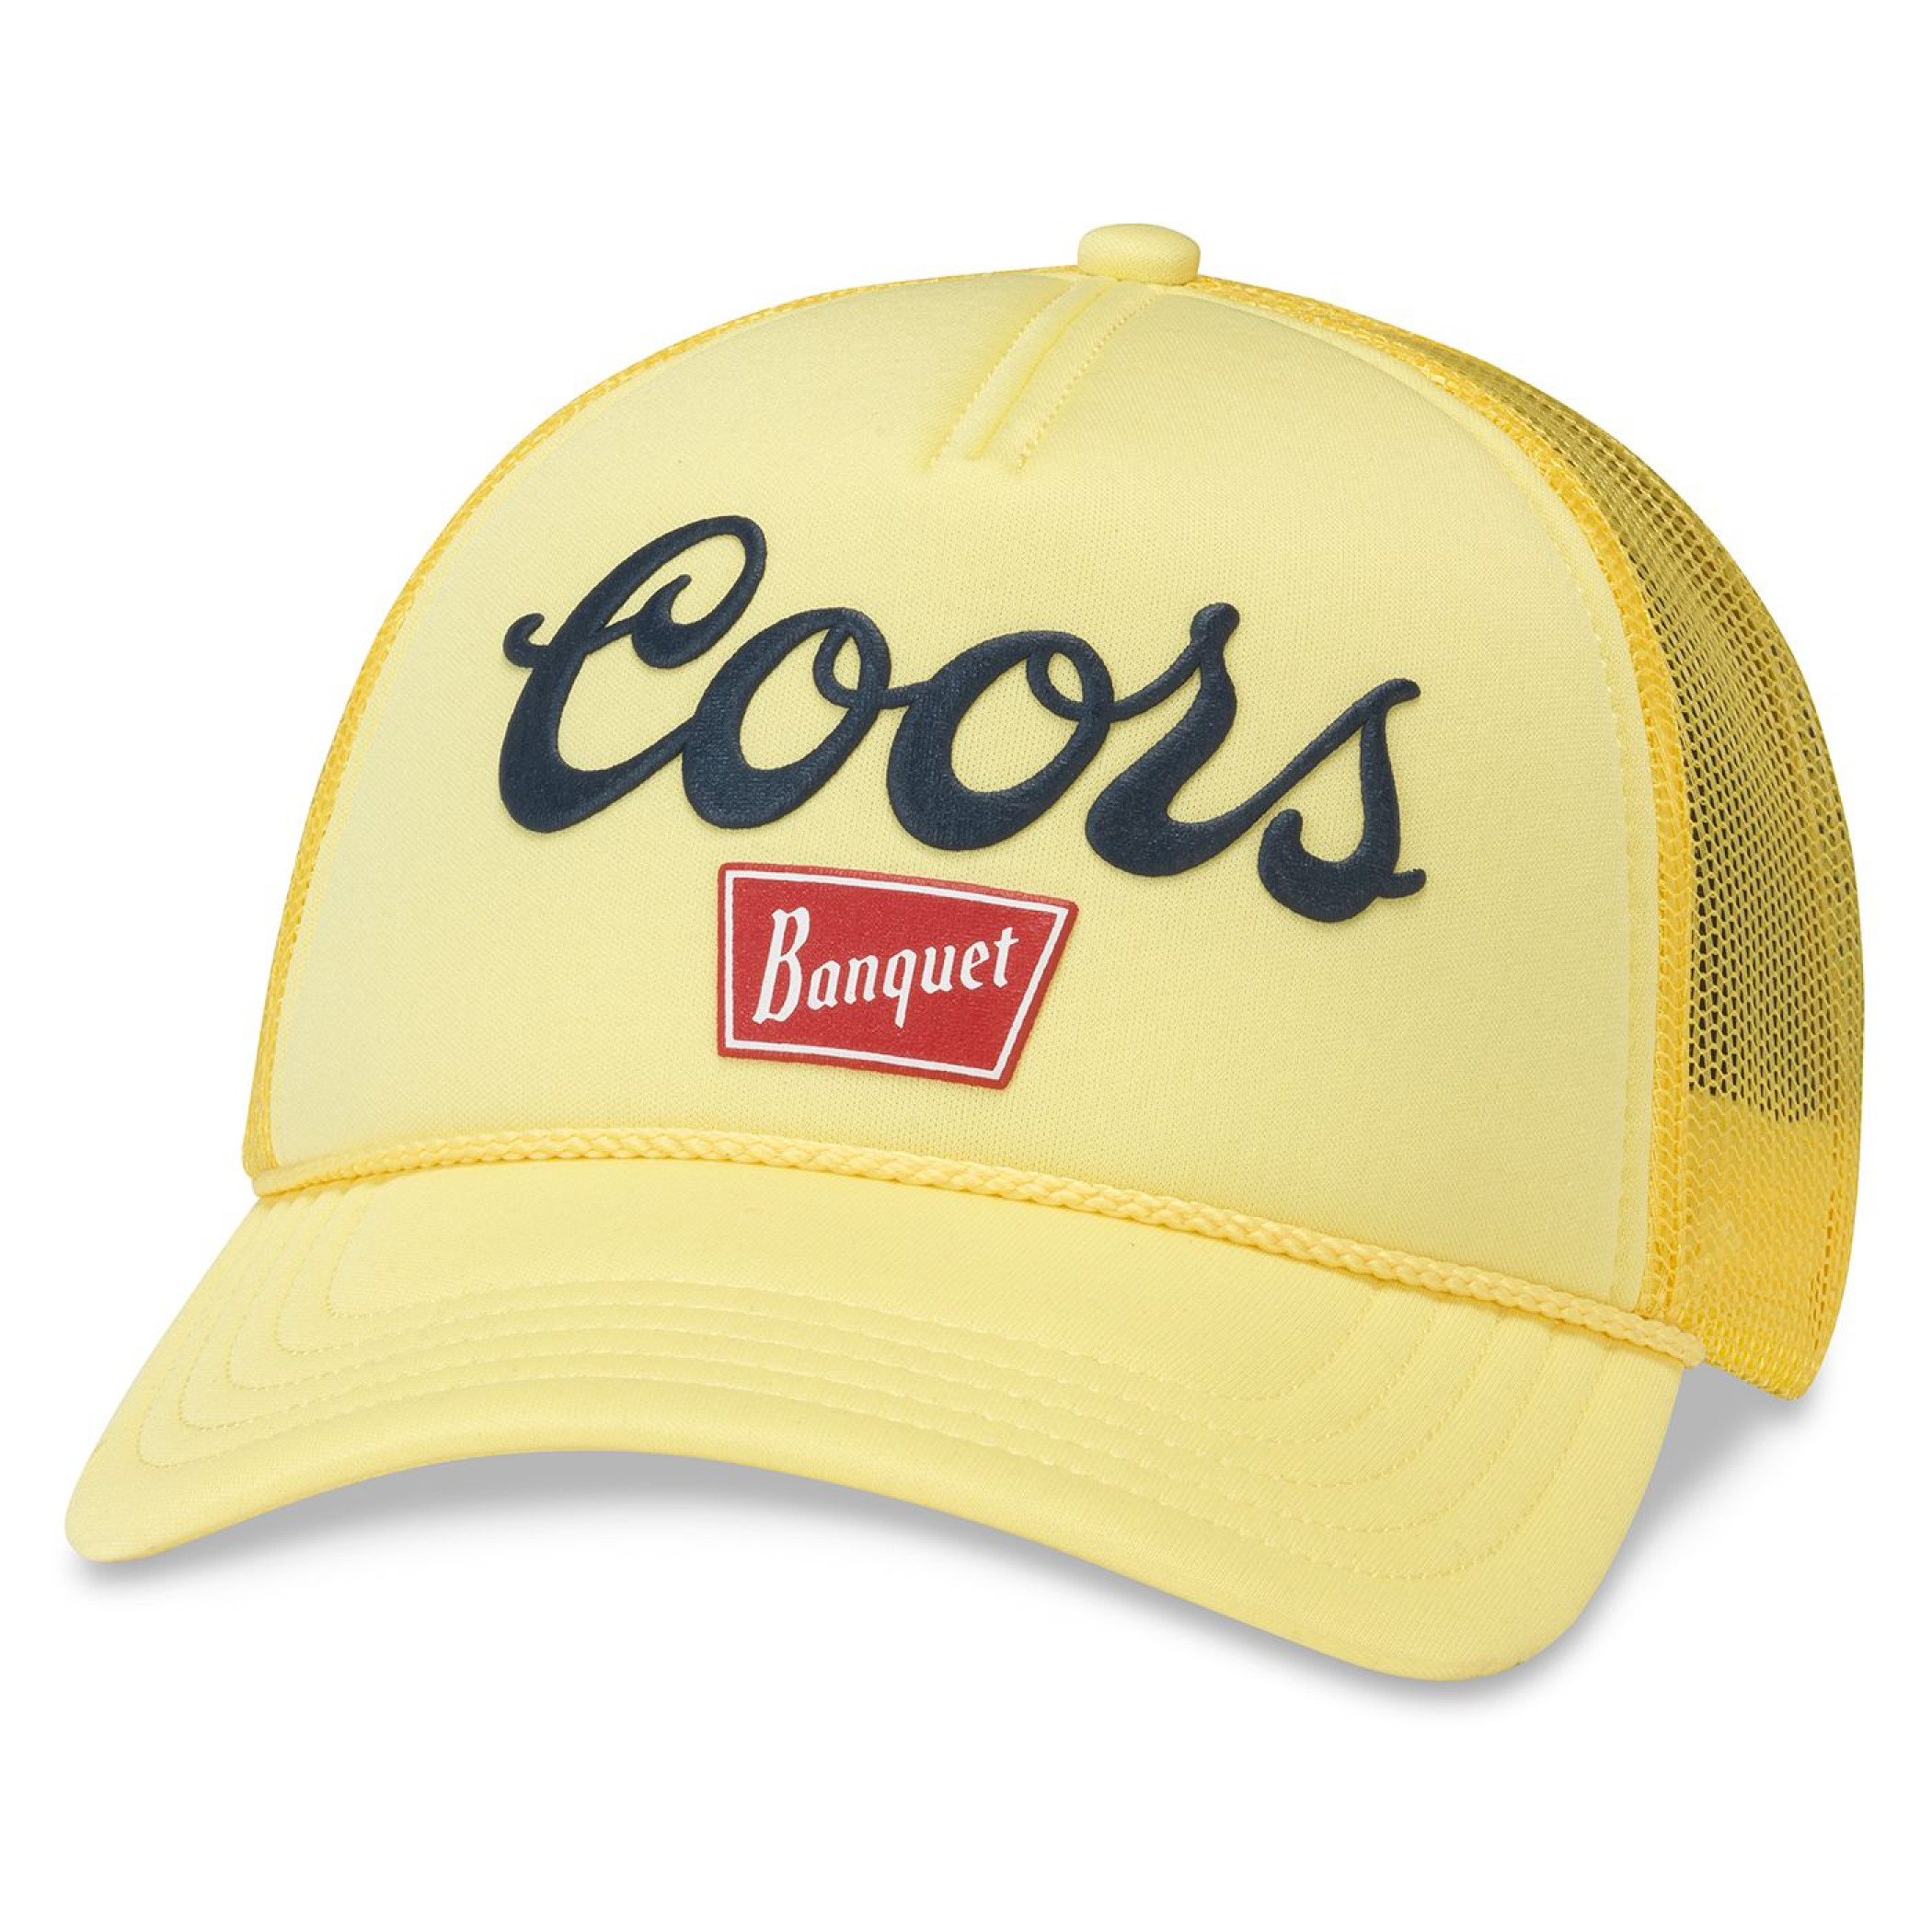 Coors Banquet Red White and Blue Vintage Hat Blue 